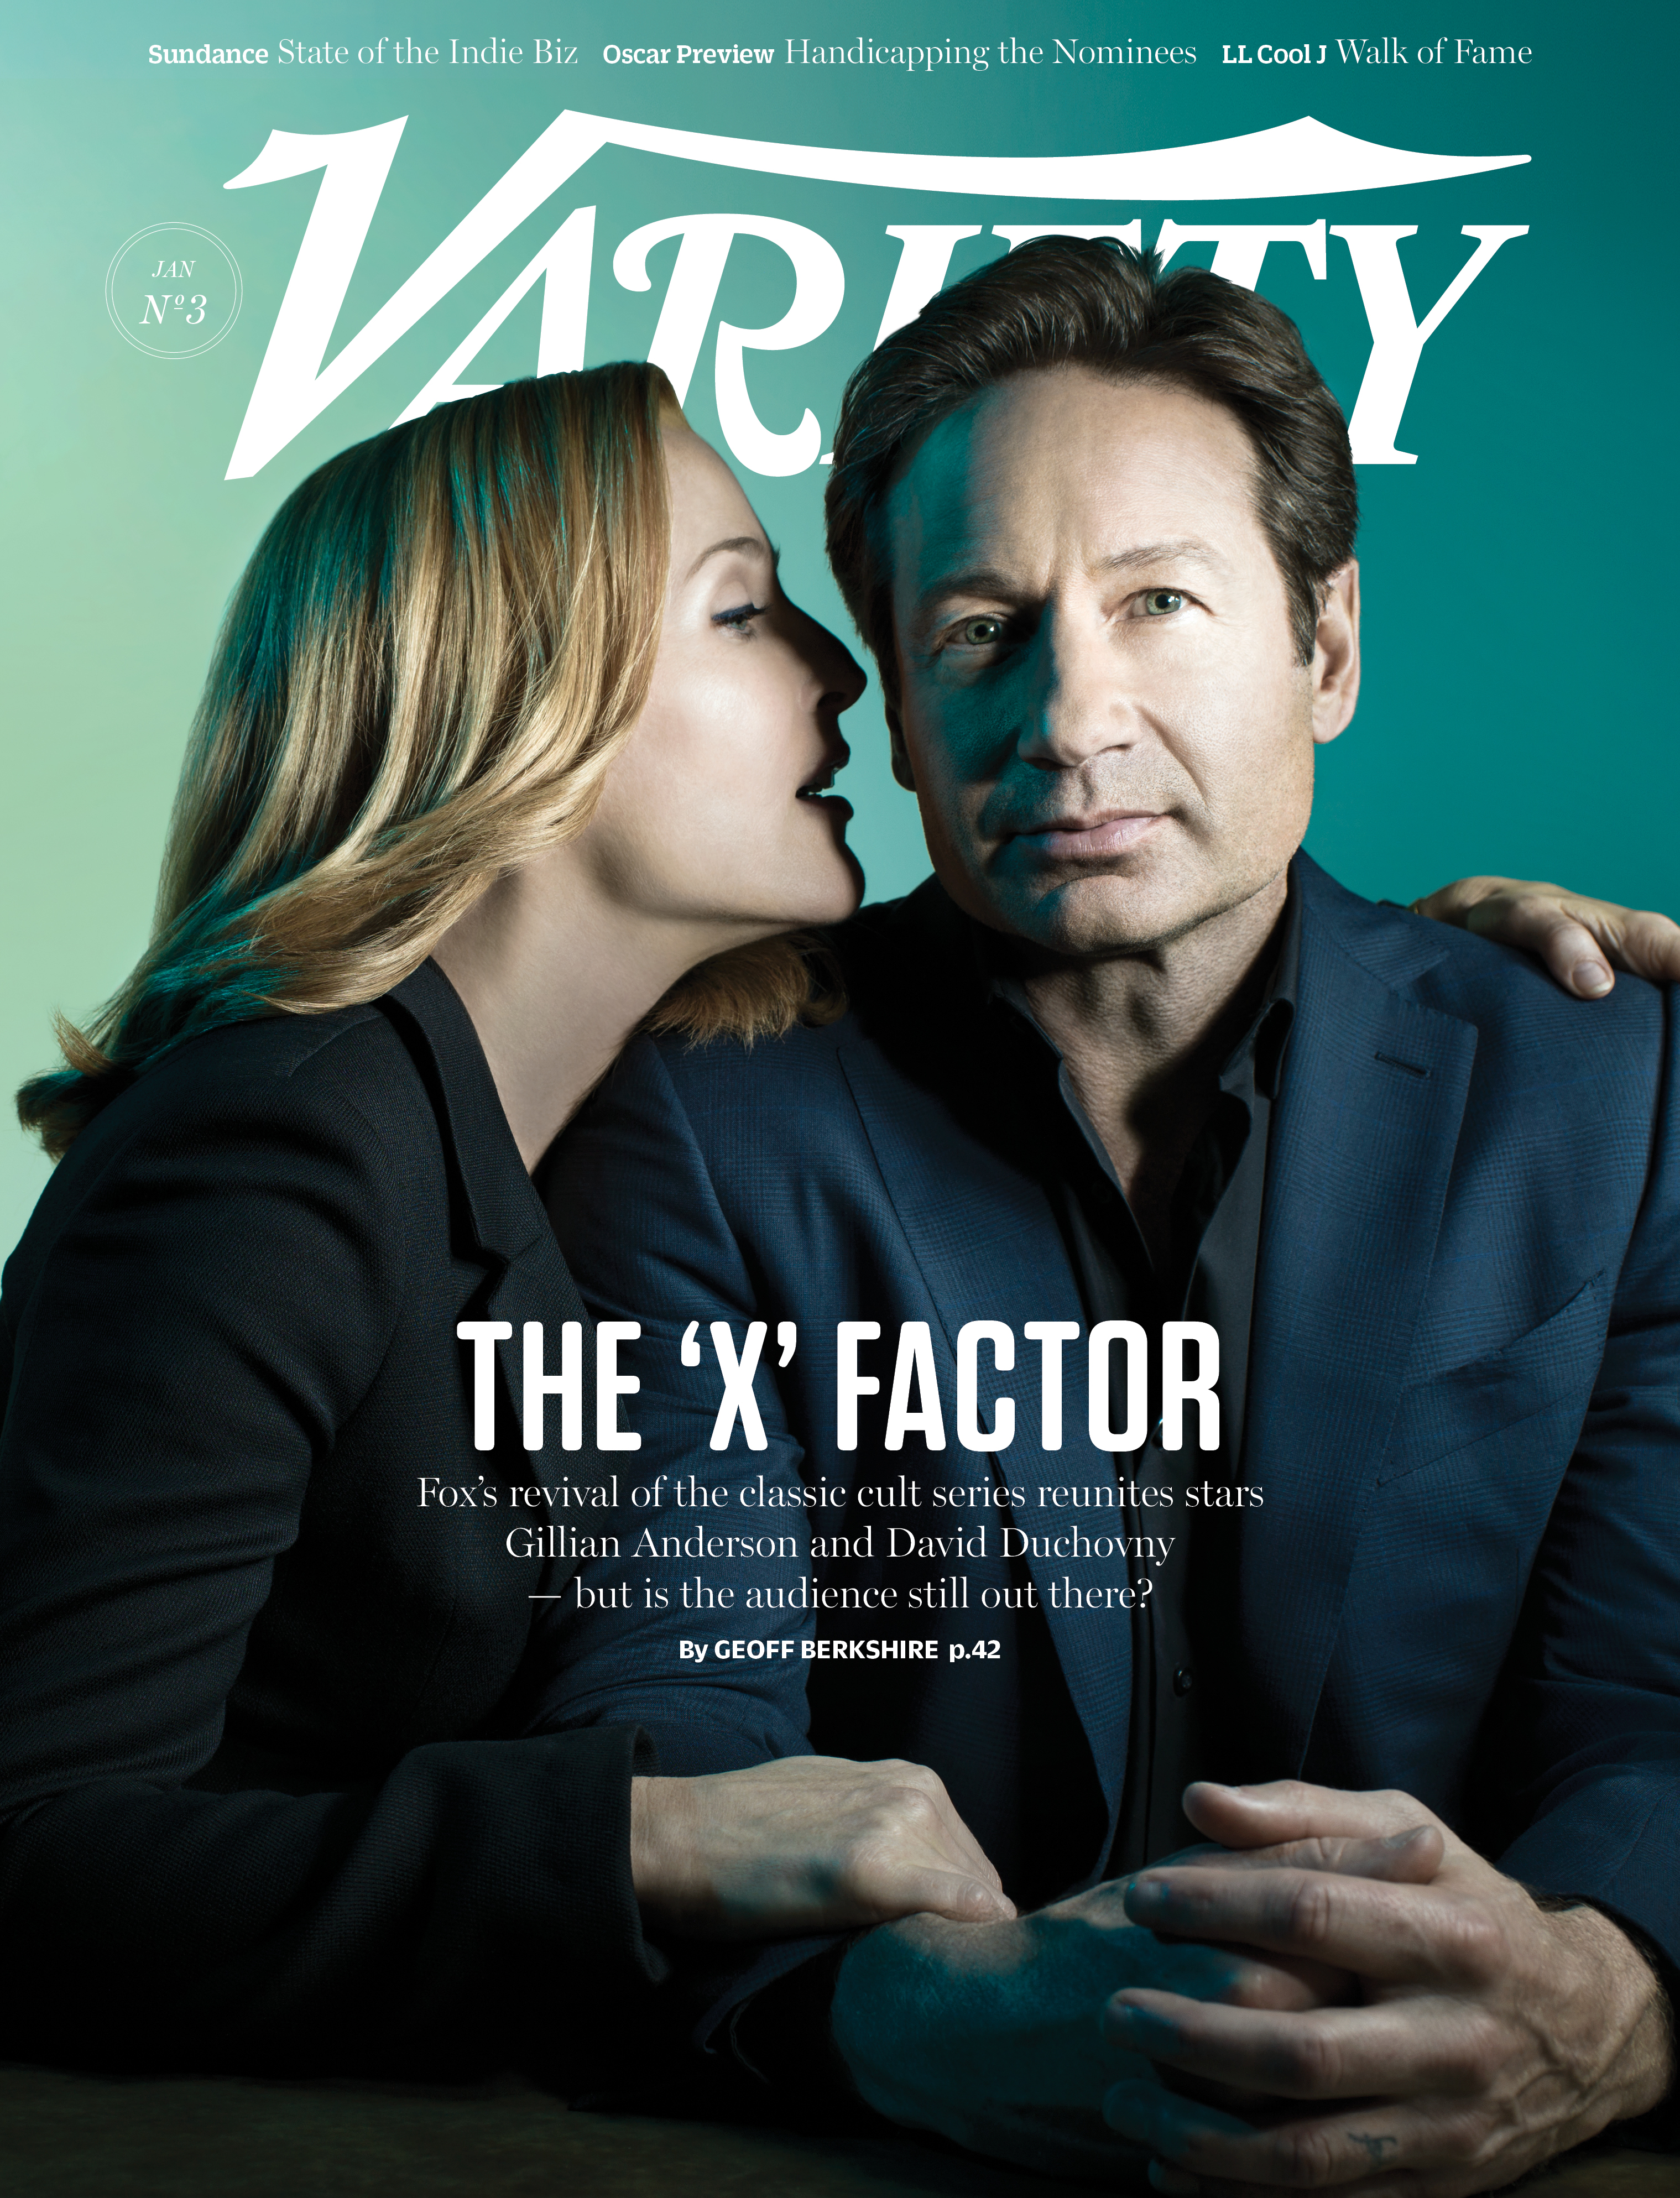 The X Files - David Duchovny and Gillian Anderson wallpaper HD ...